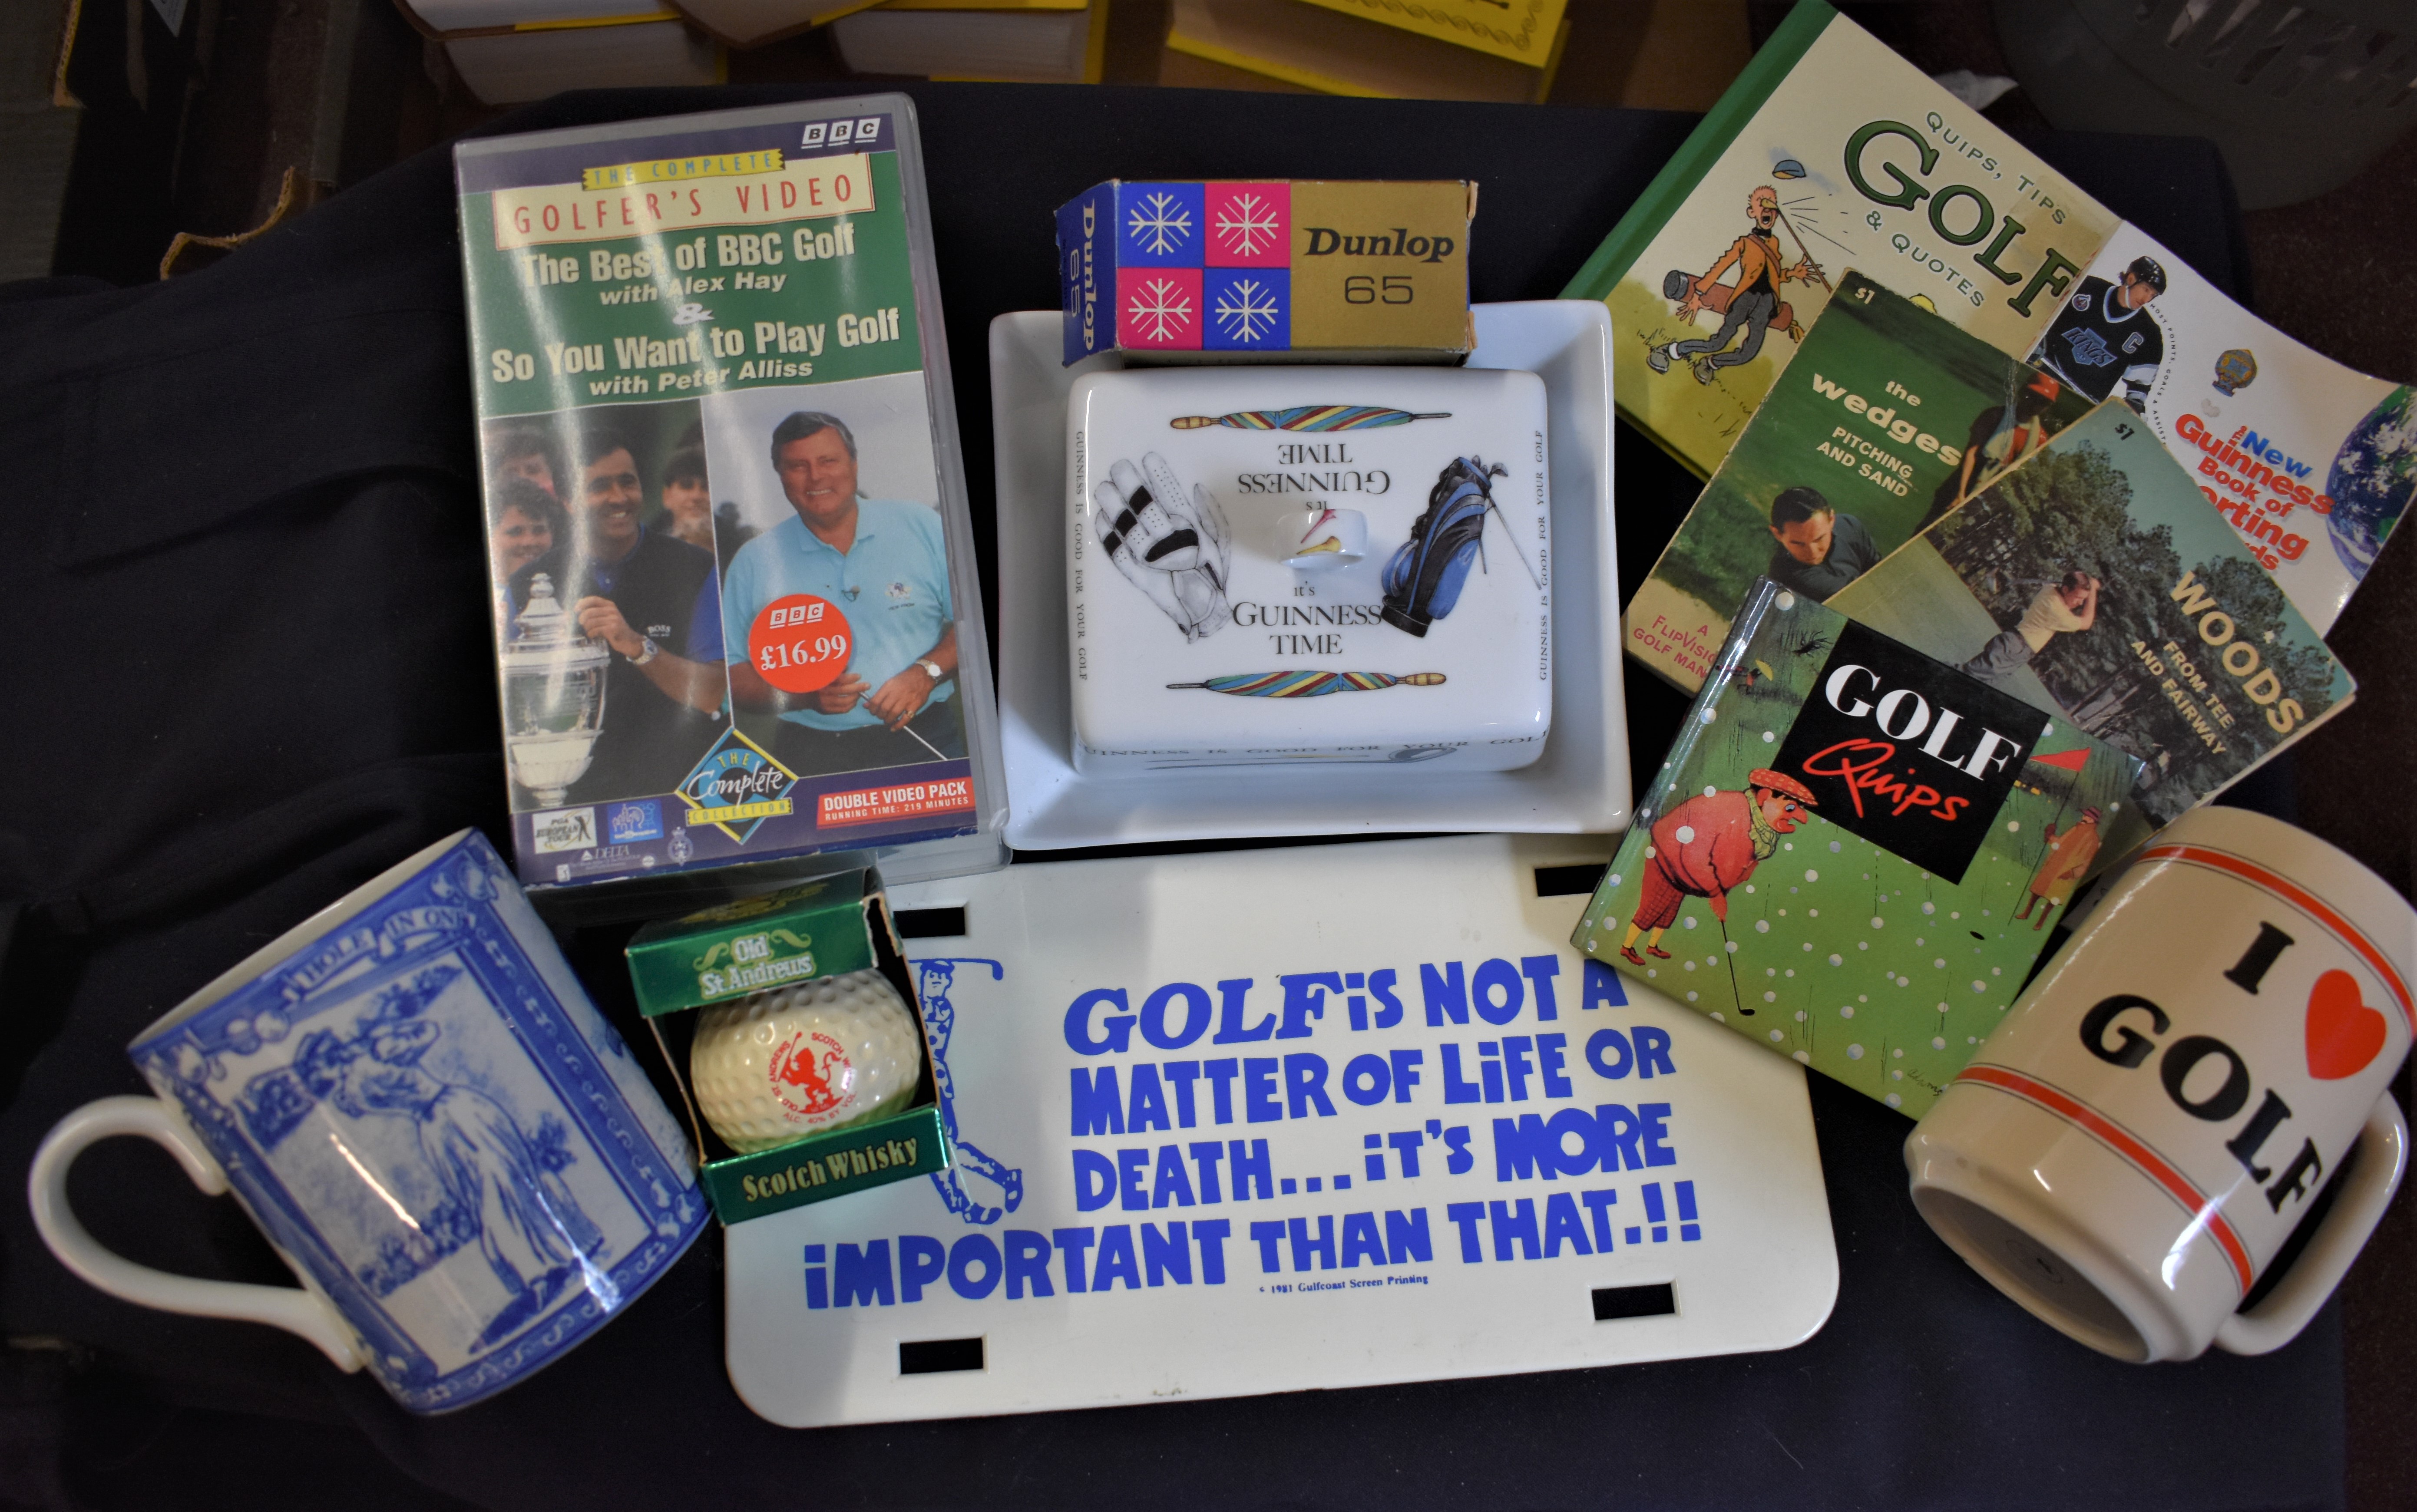 A good selection of vintage golfing memorabilia mugs including a Guinness Butter plate, books, VHS